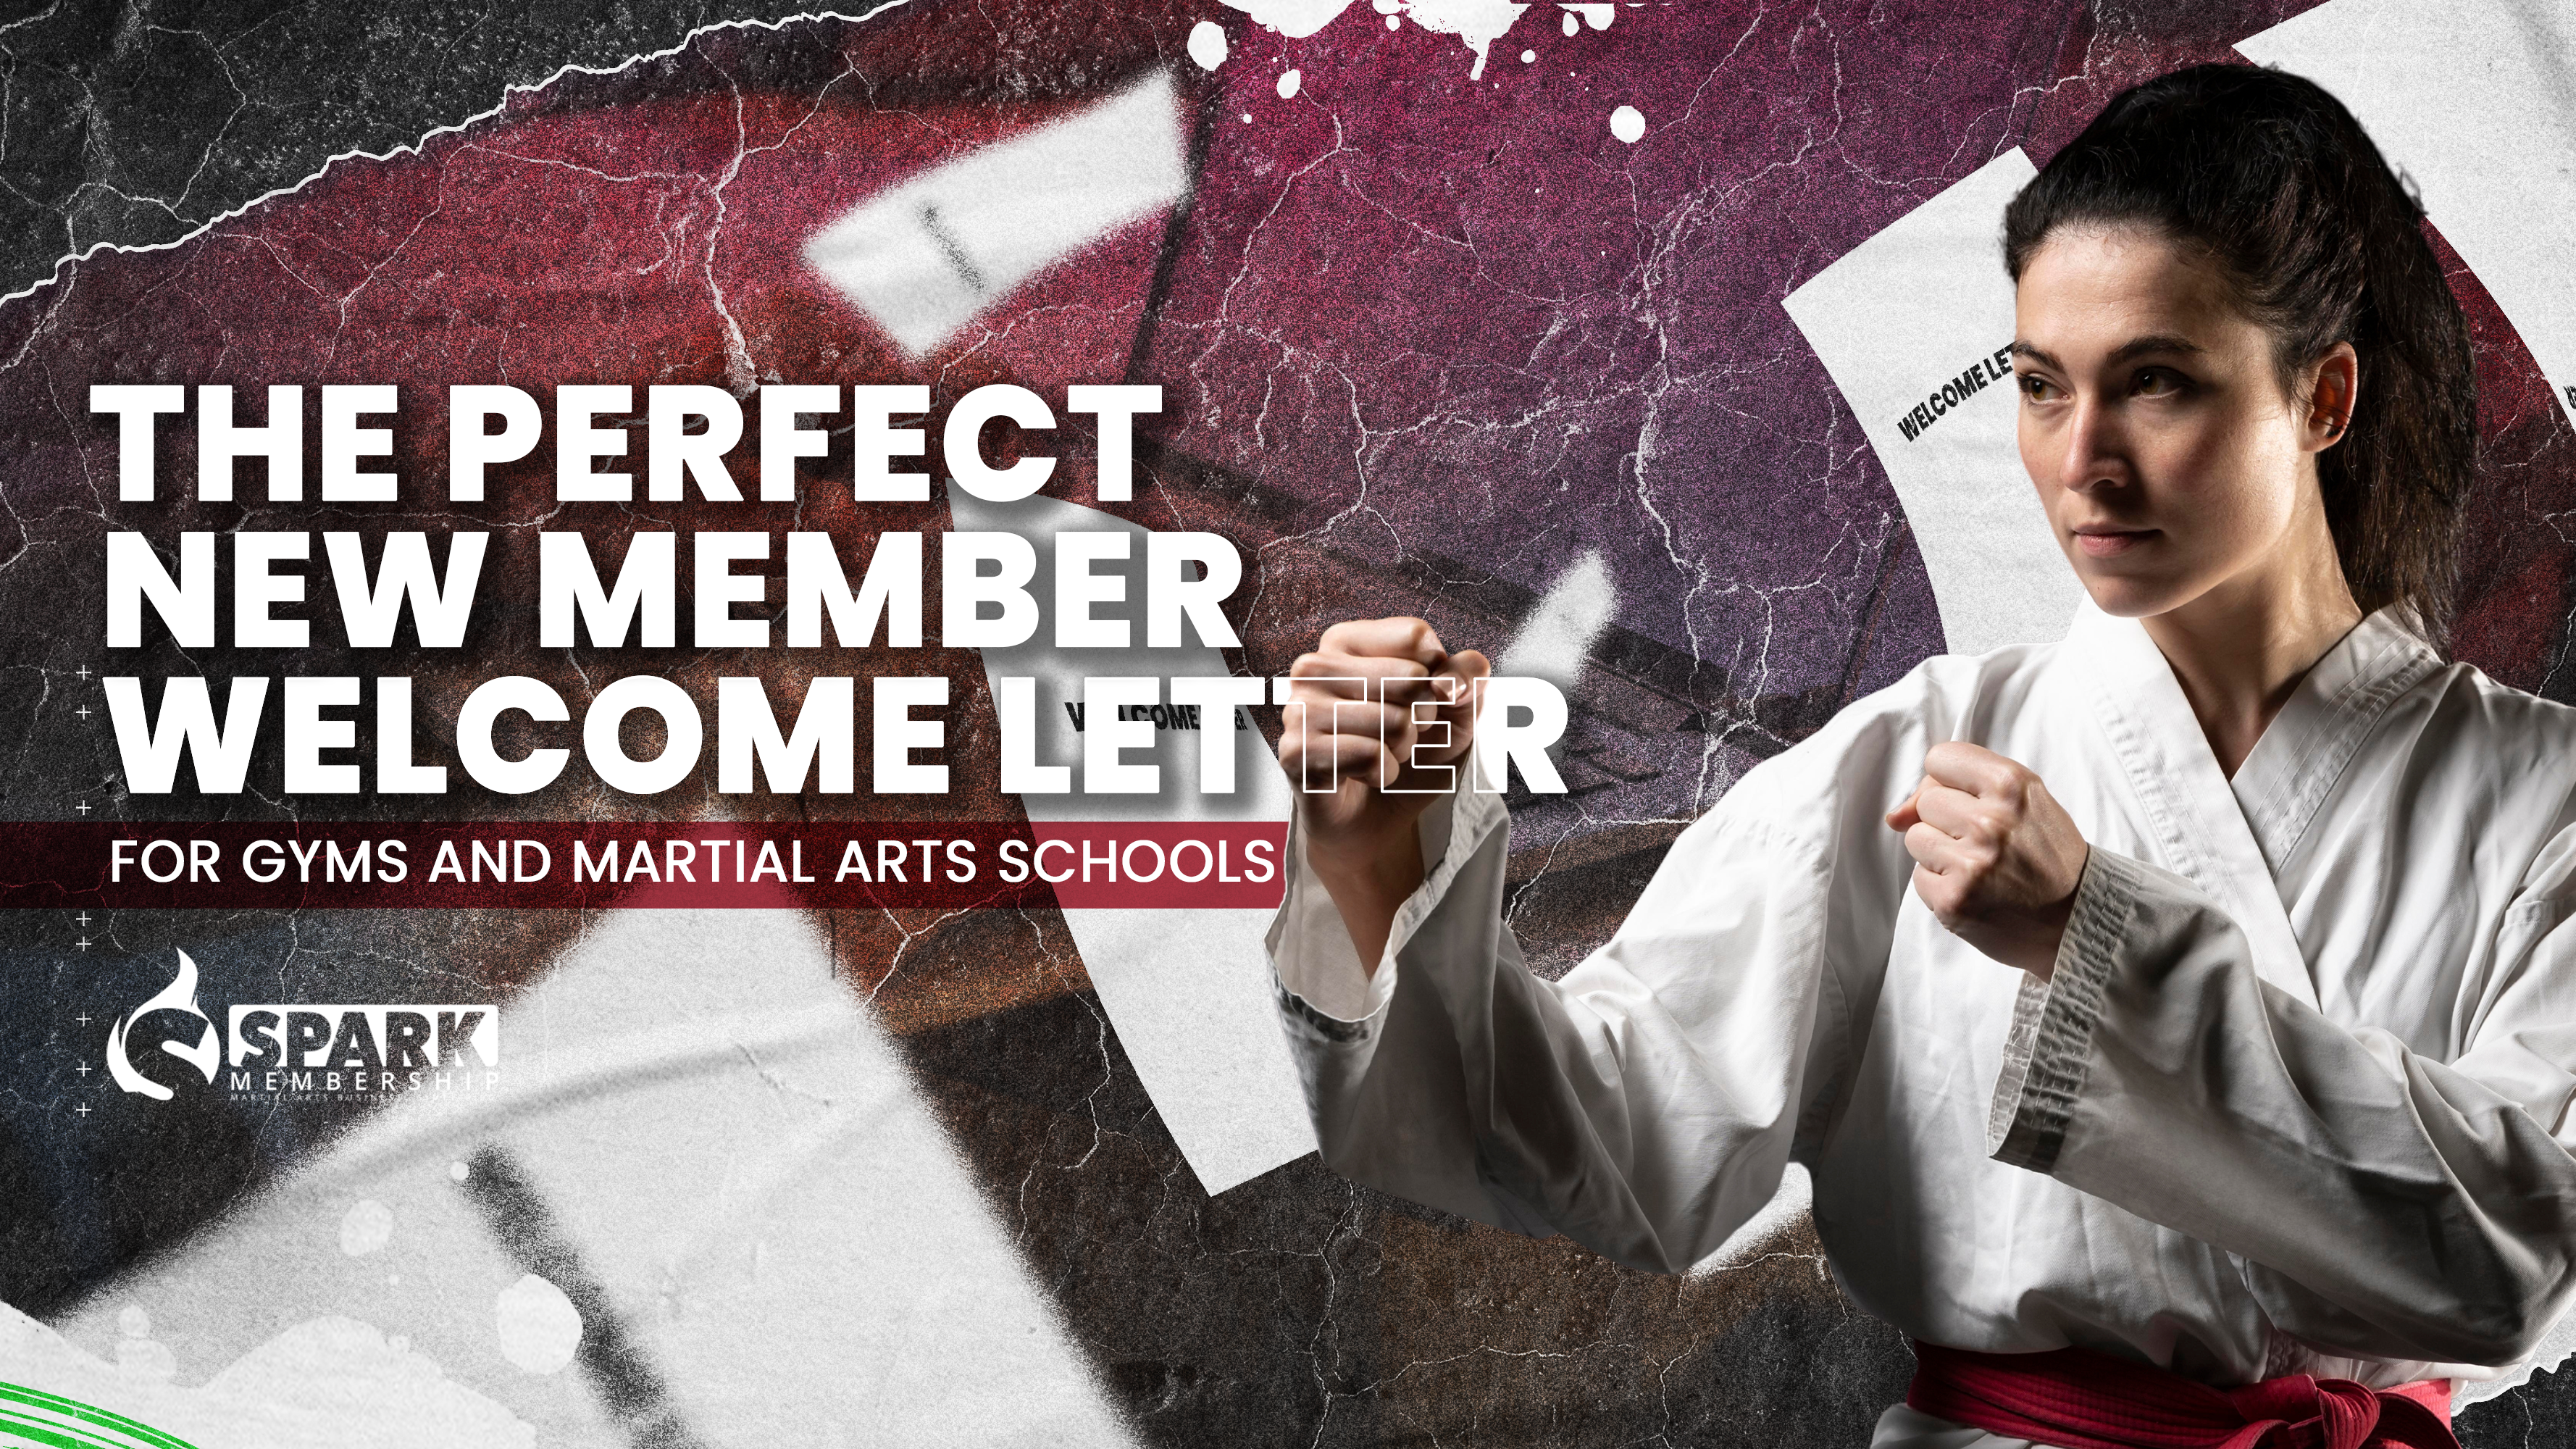 The Perfect New Member Welcome Letter for Gyms and Martial Arts Schools